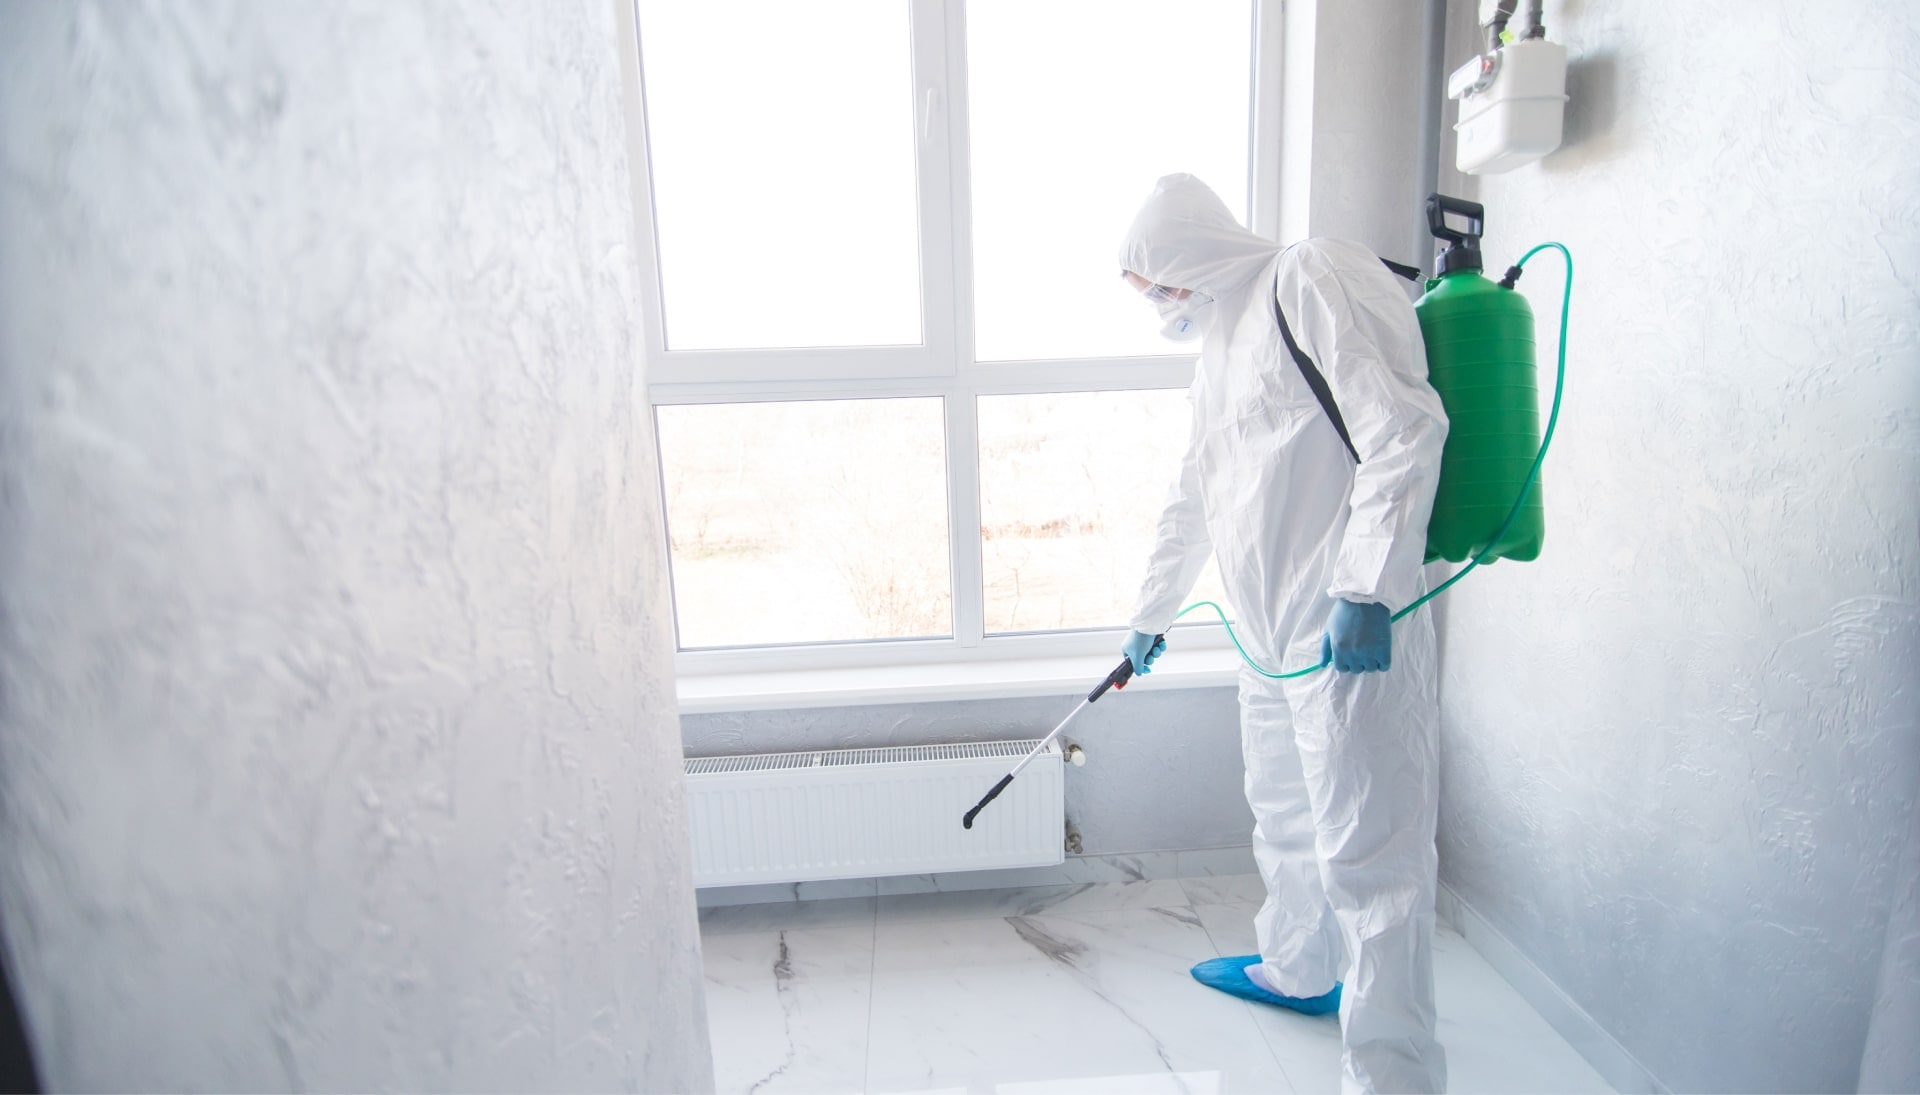 We provide the highest-quality mold inspection, testing, and removal services in the Alexandria, Virginia area.